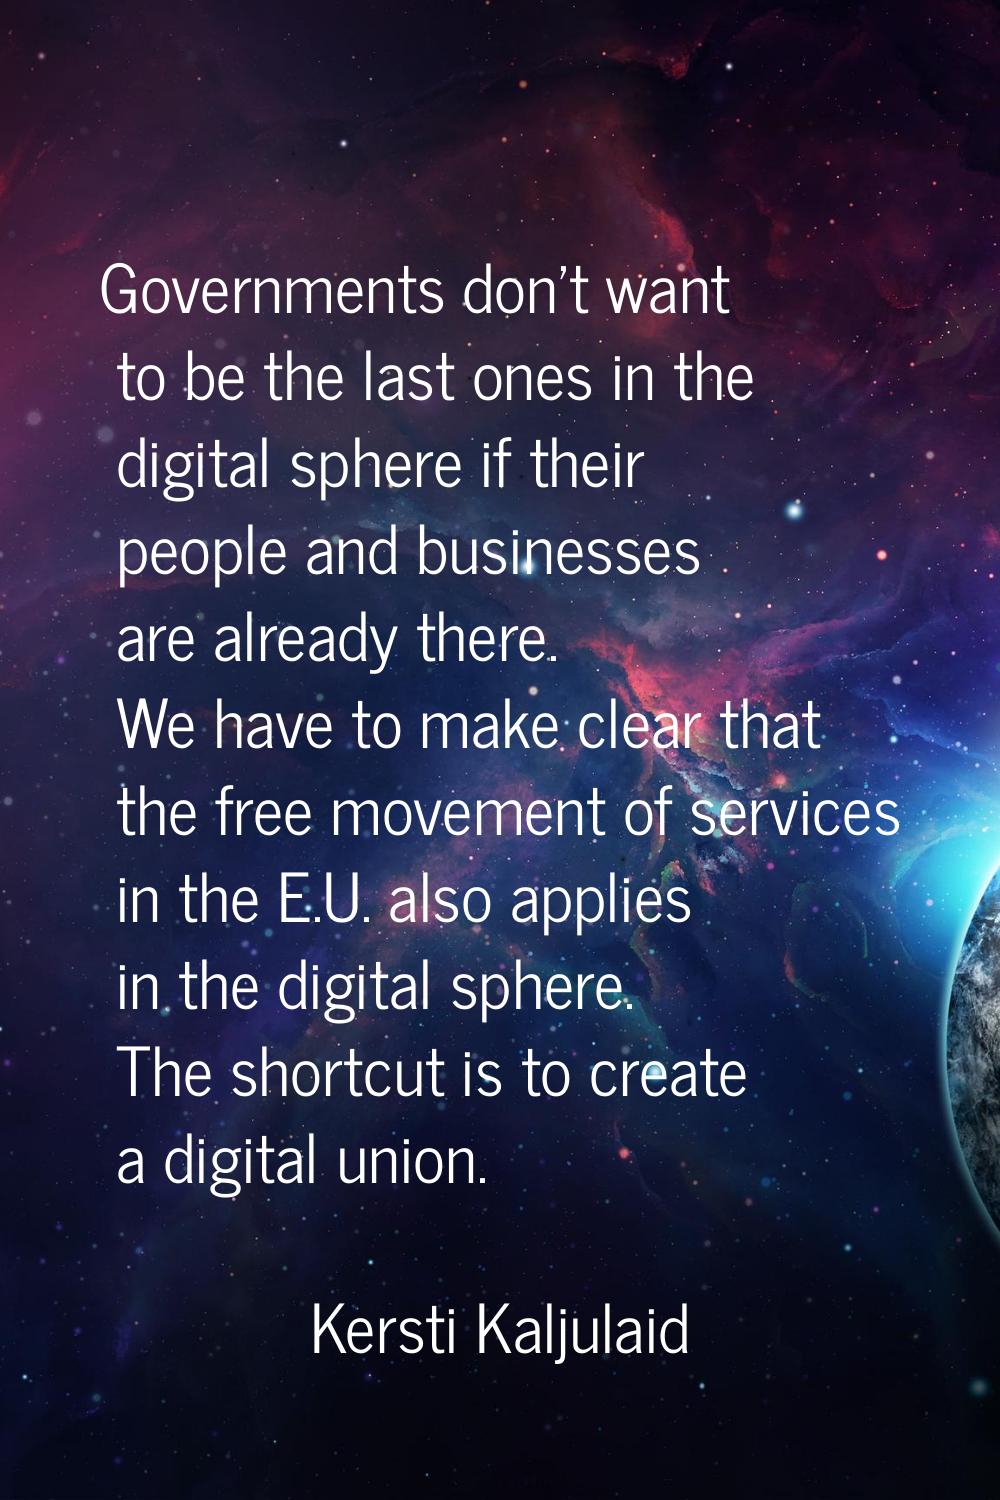 Governments don't want to be the last ones in the digital sphere if their people and businesses are